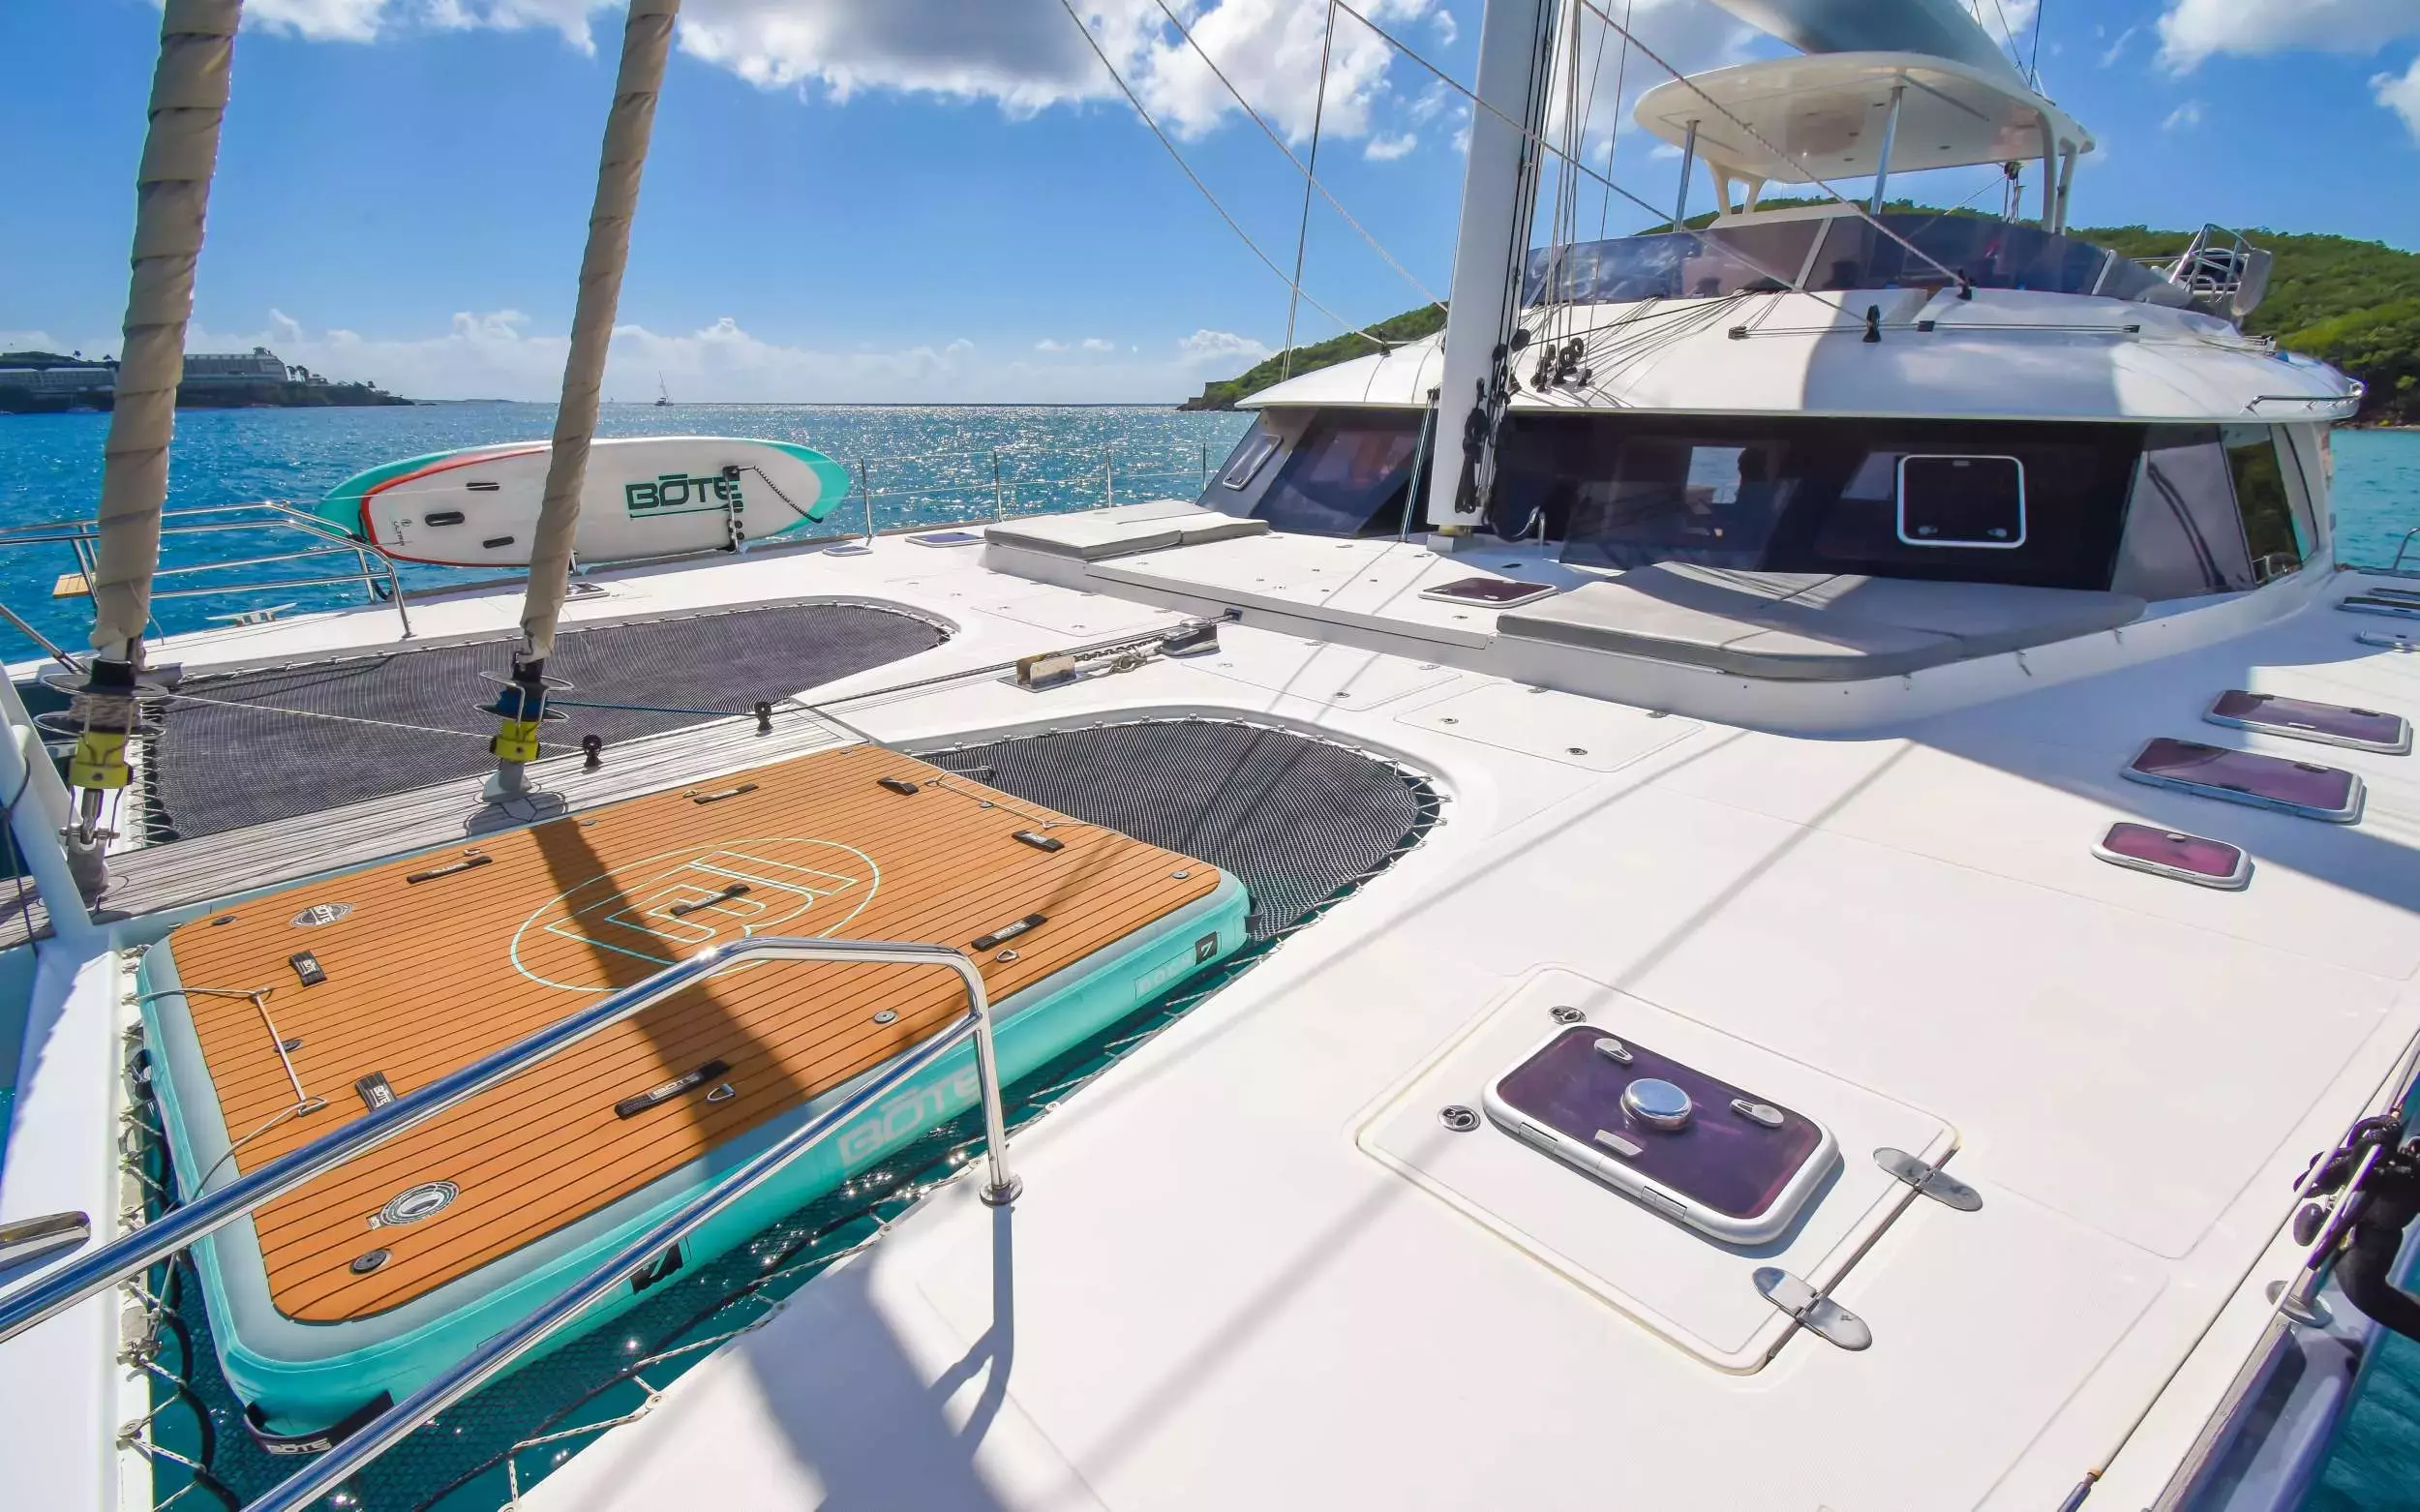 Excess by Sunreef Yachts - Top rates for a Charter of a private Luxury Catamaran in Puerto Rico